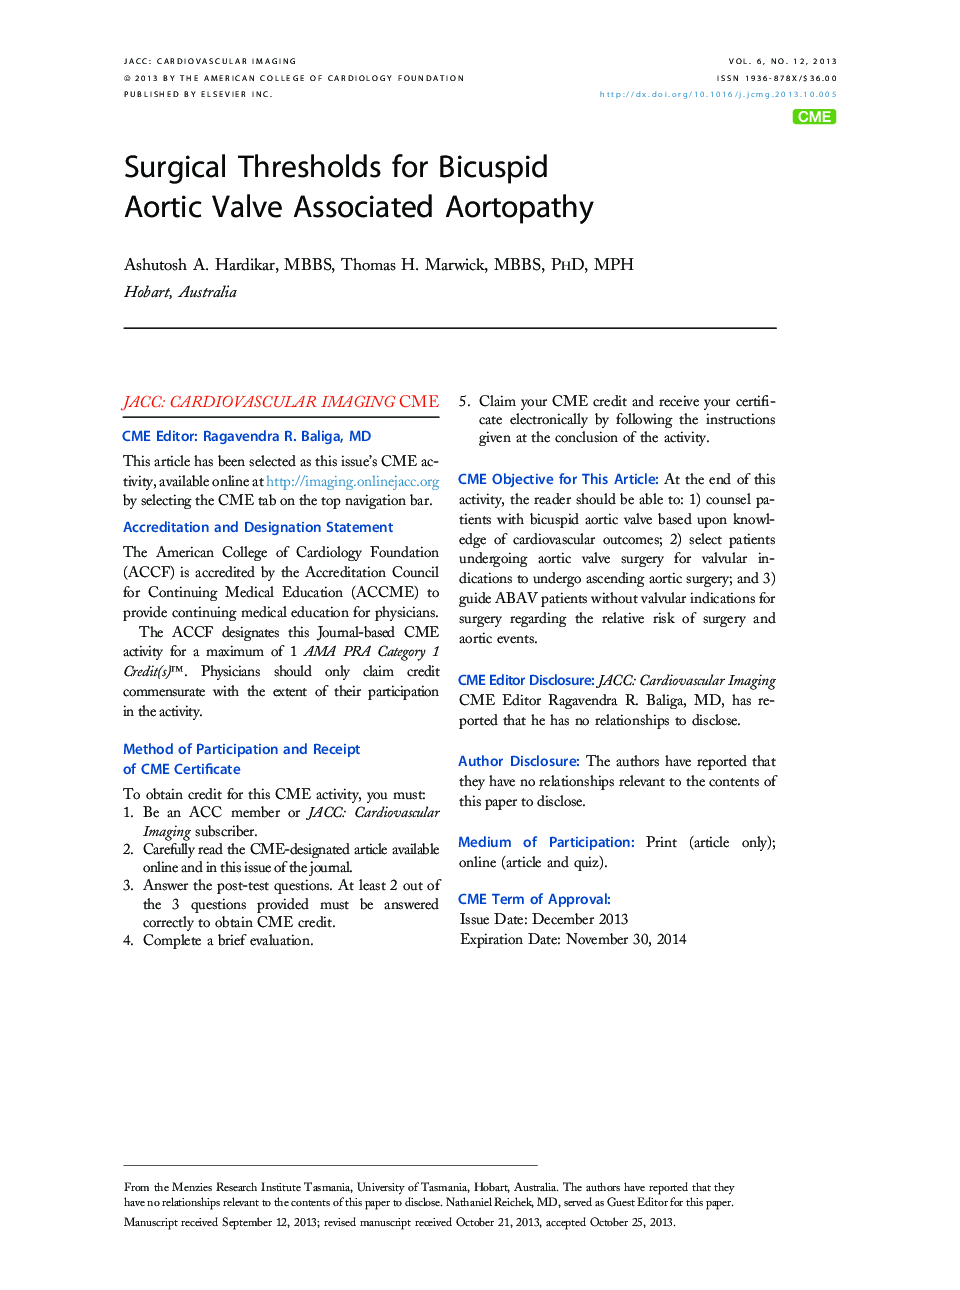 Surgical Thresholds for Bicuspid Aortic Valve Associated Aortopathy 